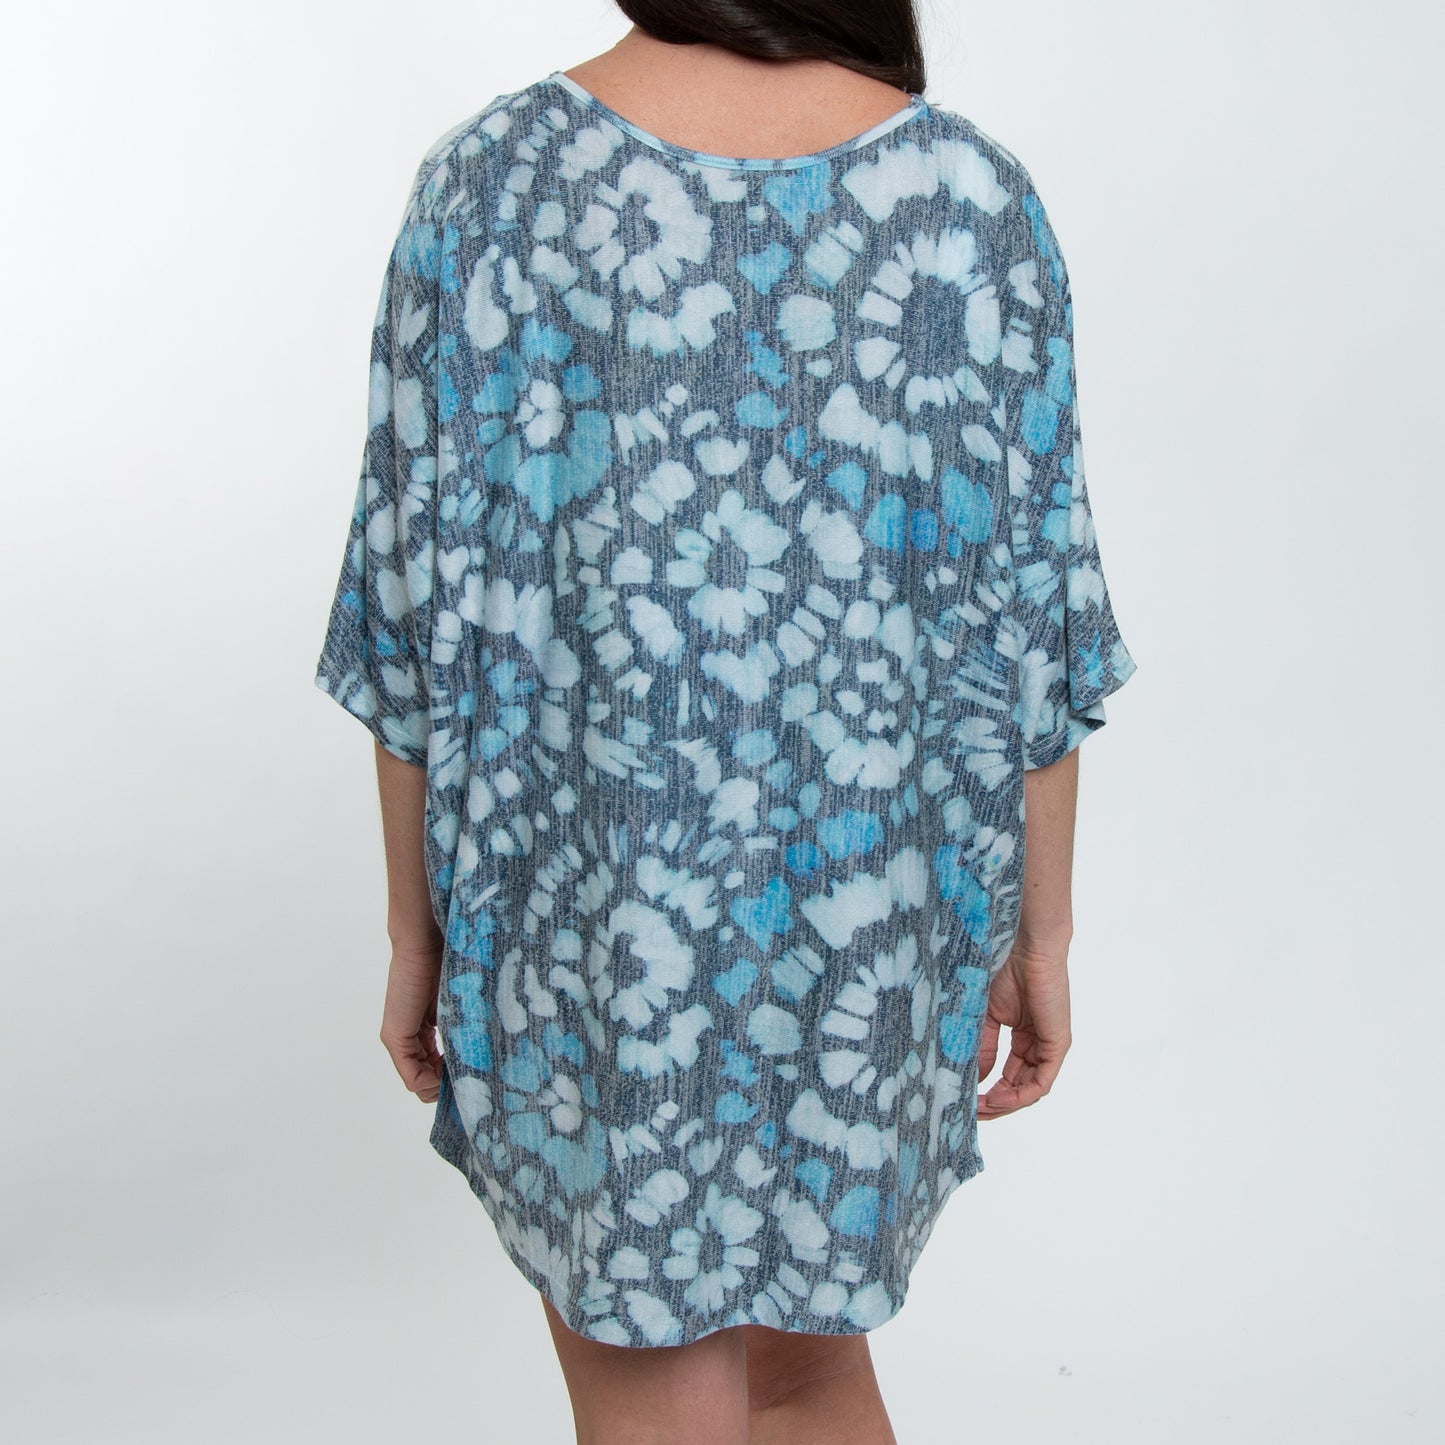 Elsie Ocean Mosaic Printed One Size Beach Swimsuit Cover Up